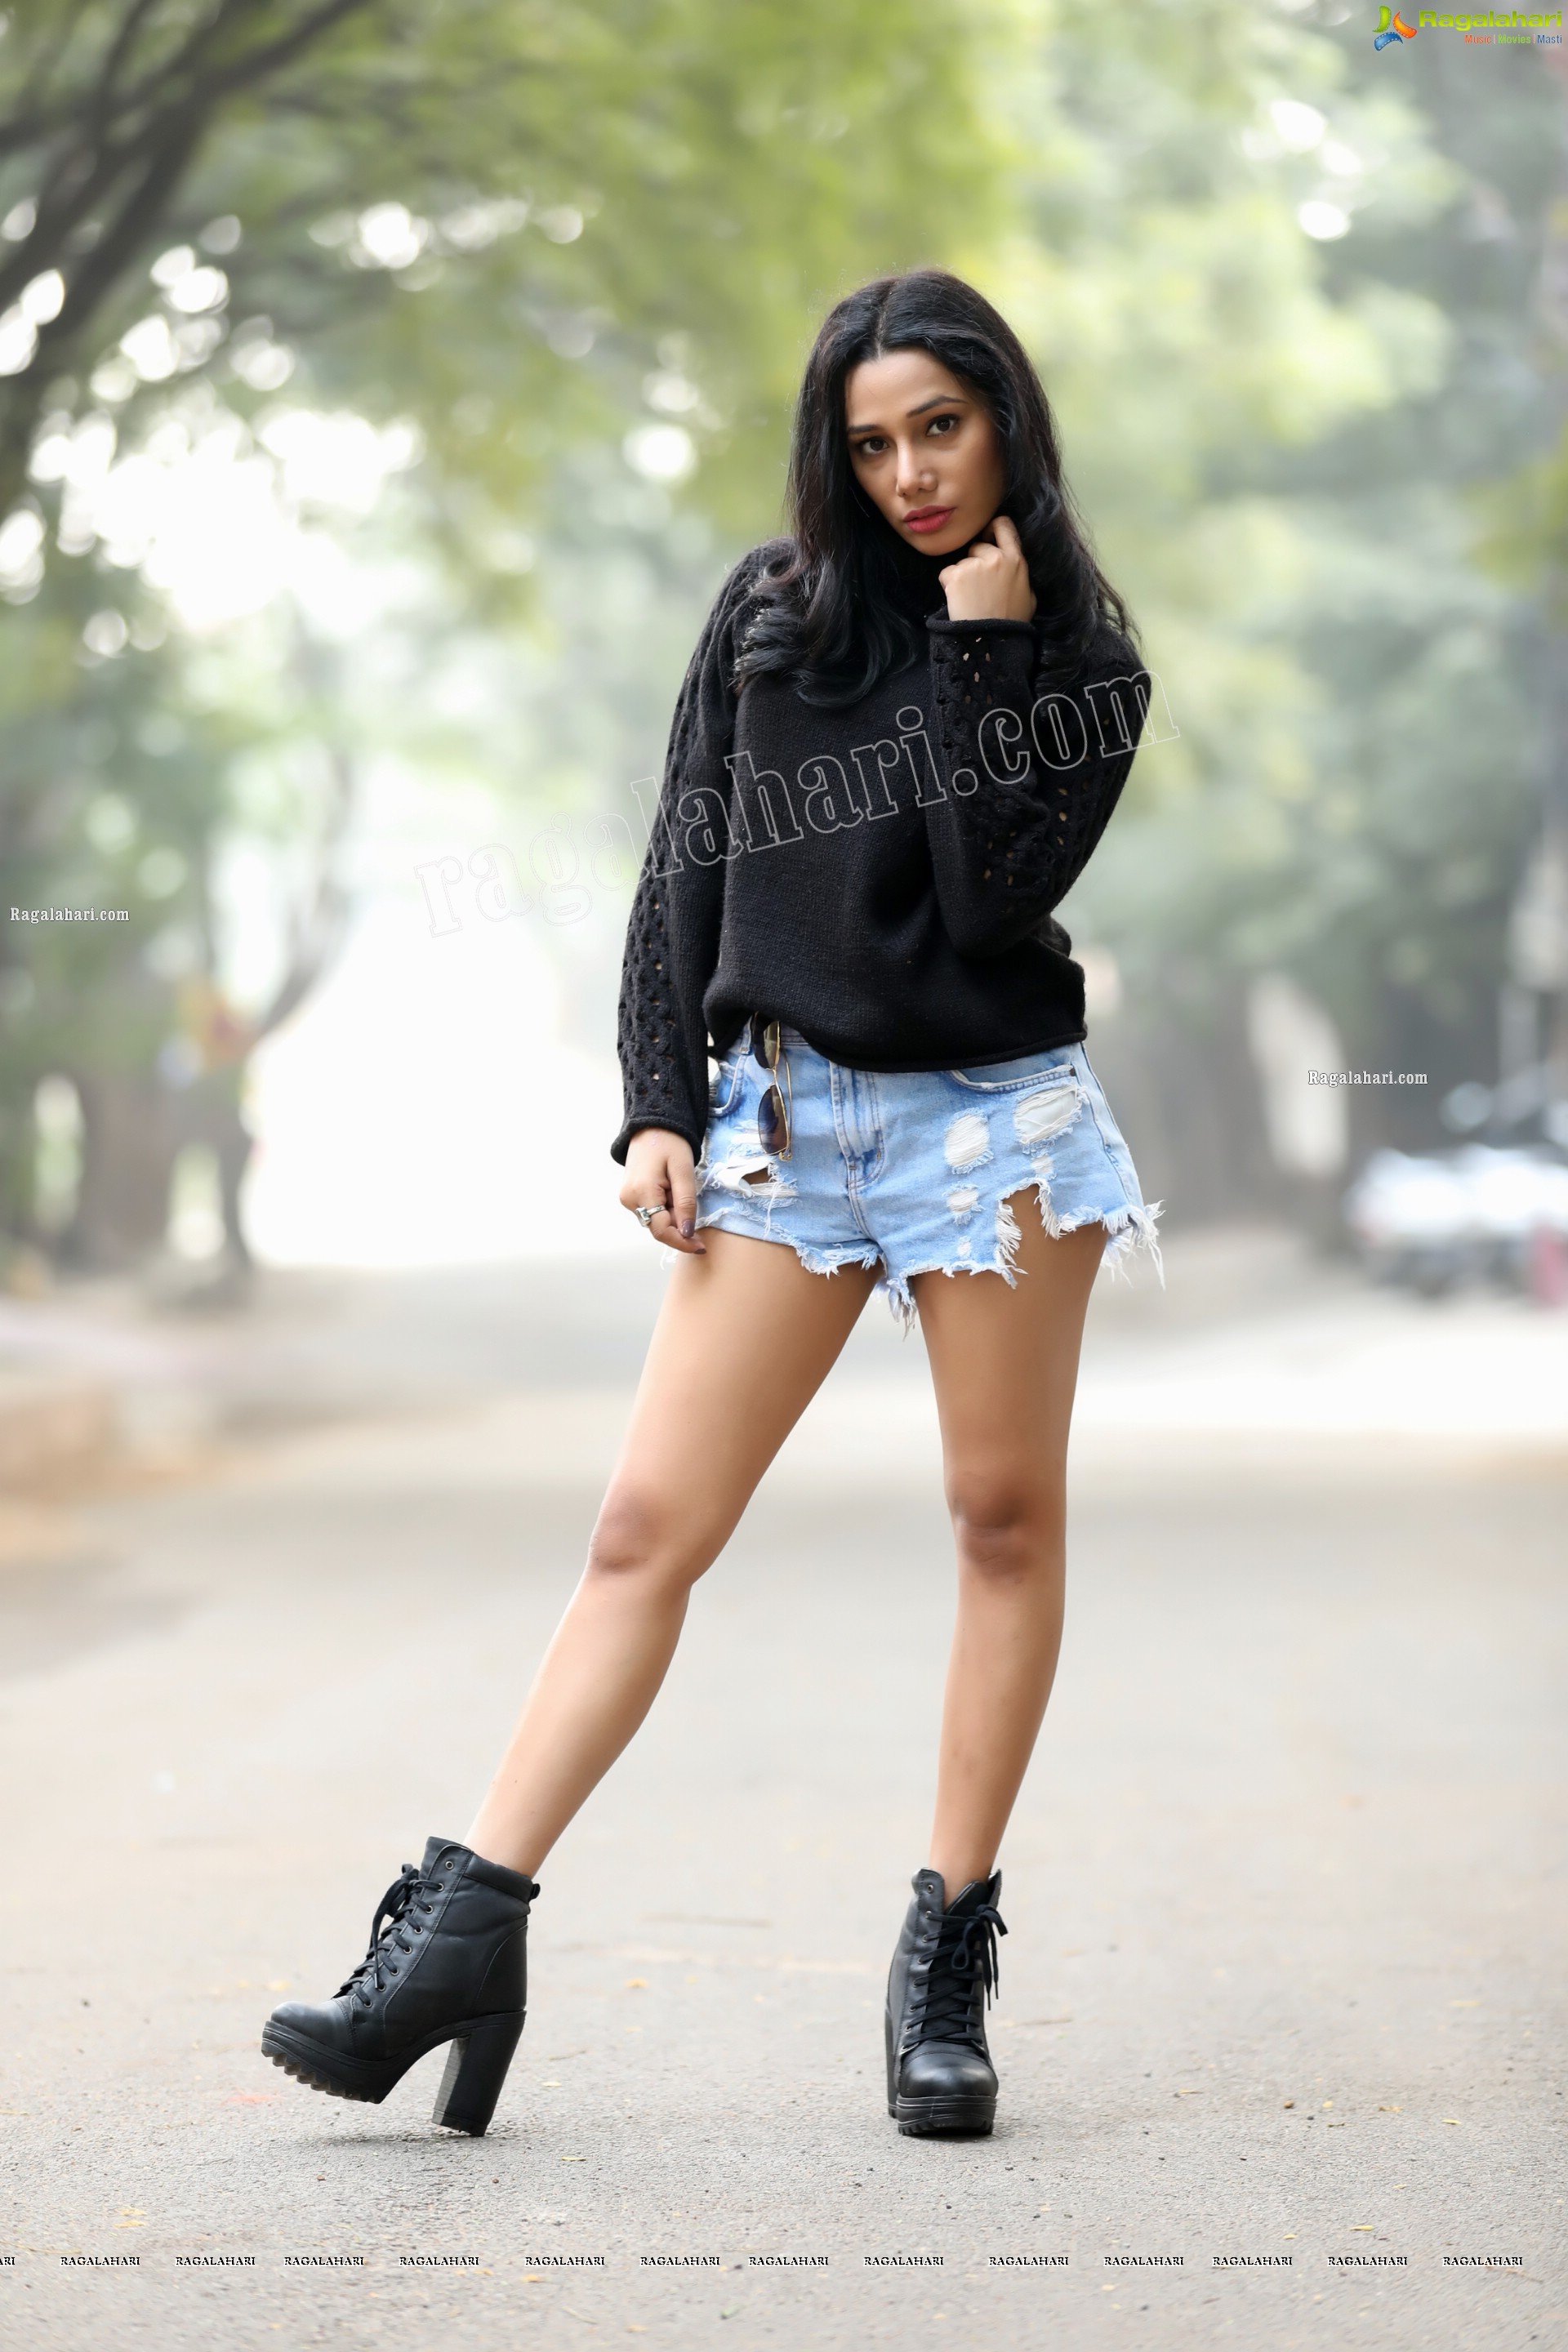 Tueeshaa in Black Turtle Neck T-Shirt and Denim Shorts Exclusive Photo Shoot